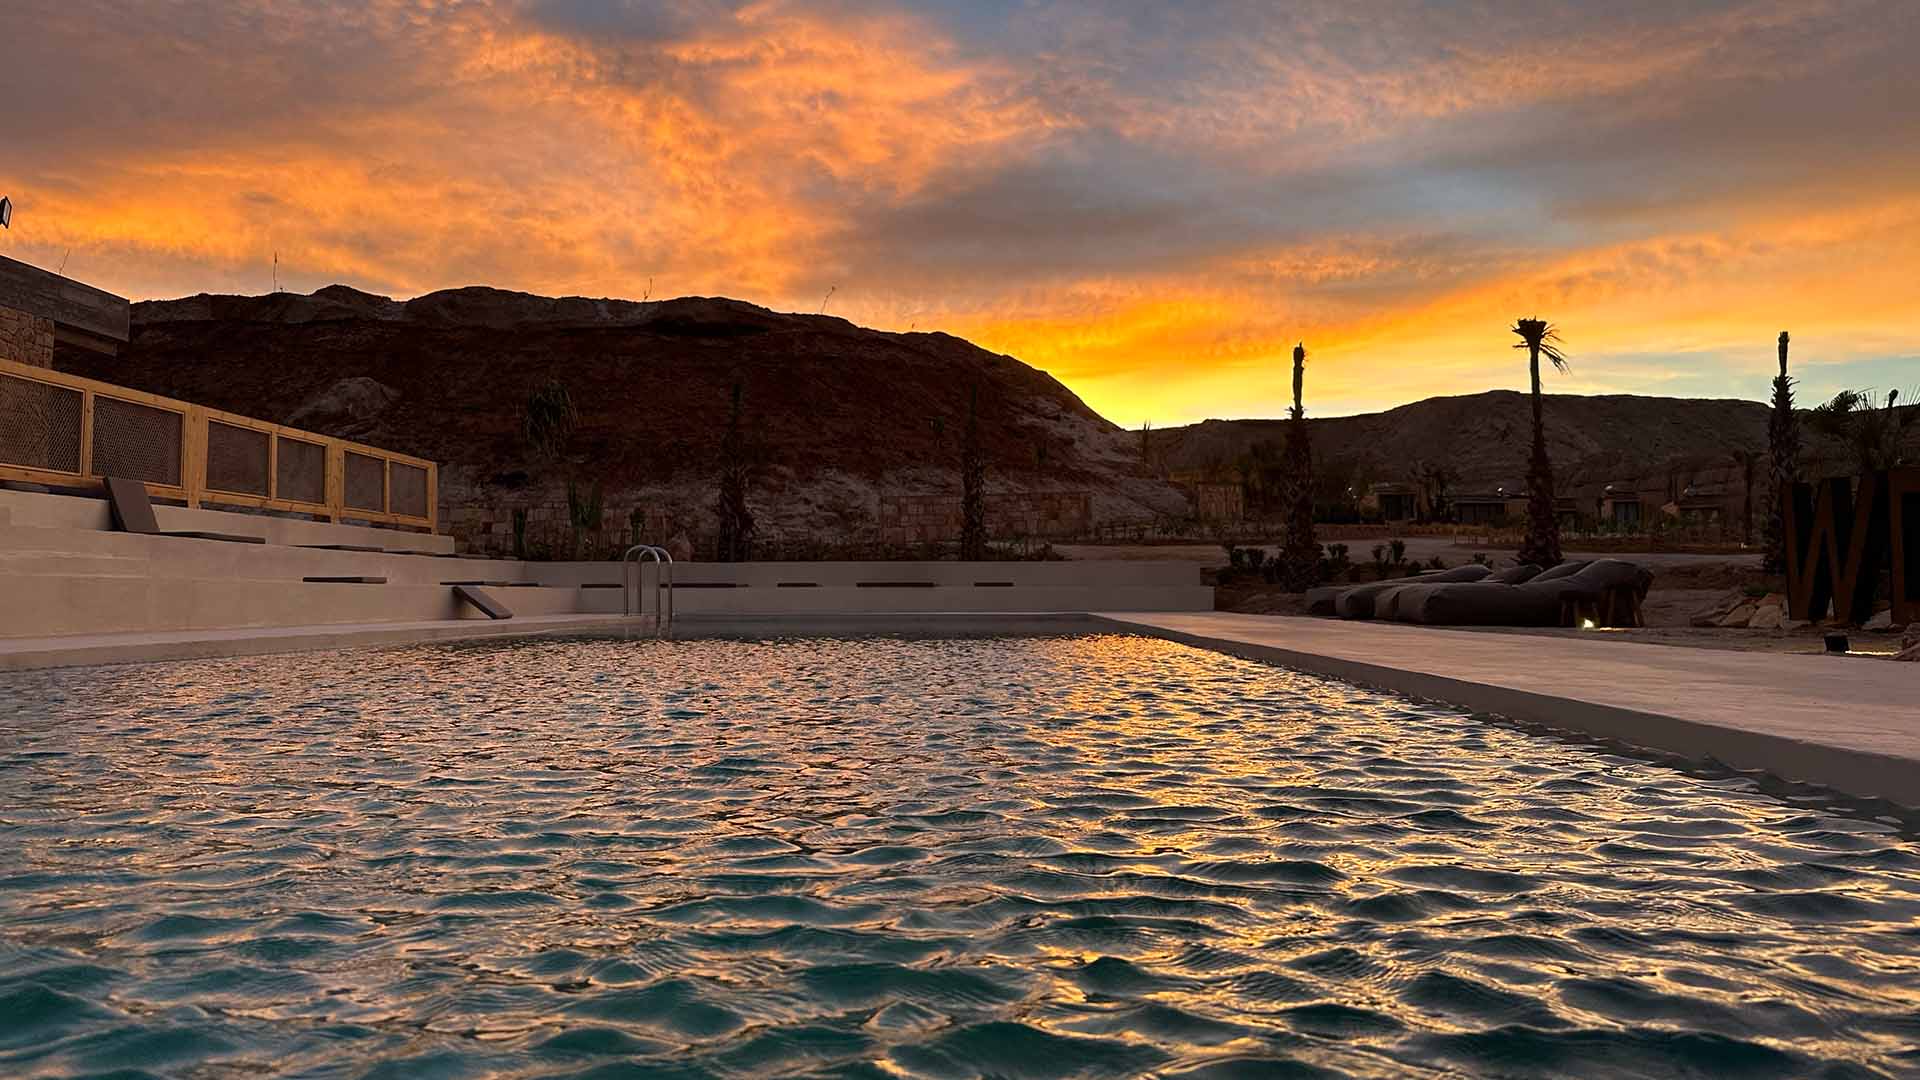 pool in the Sahara desert with a sunset